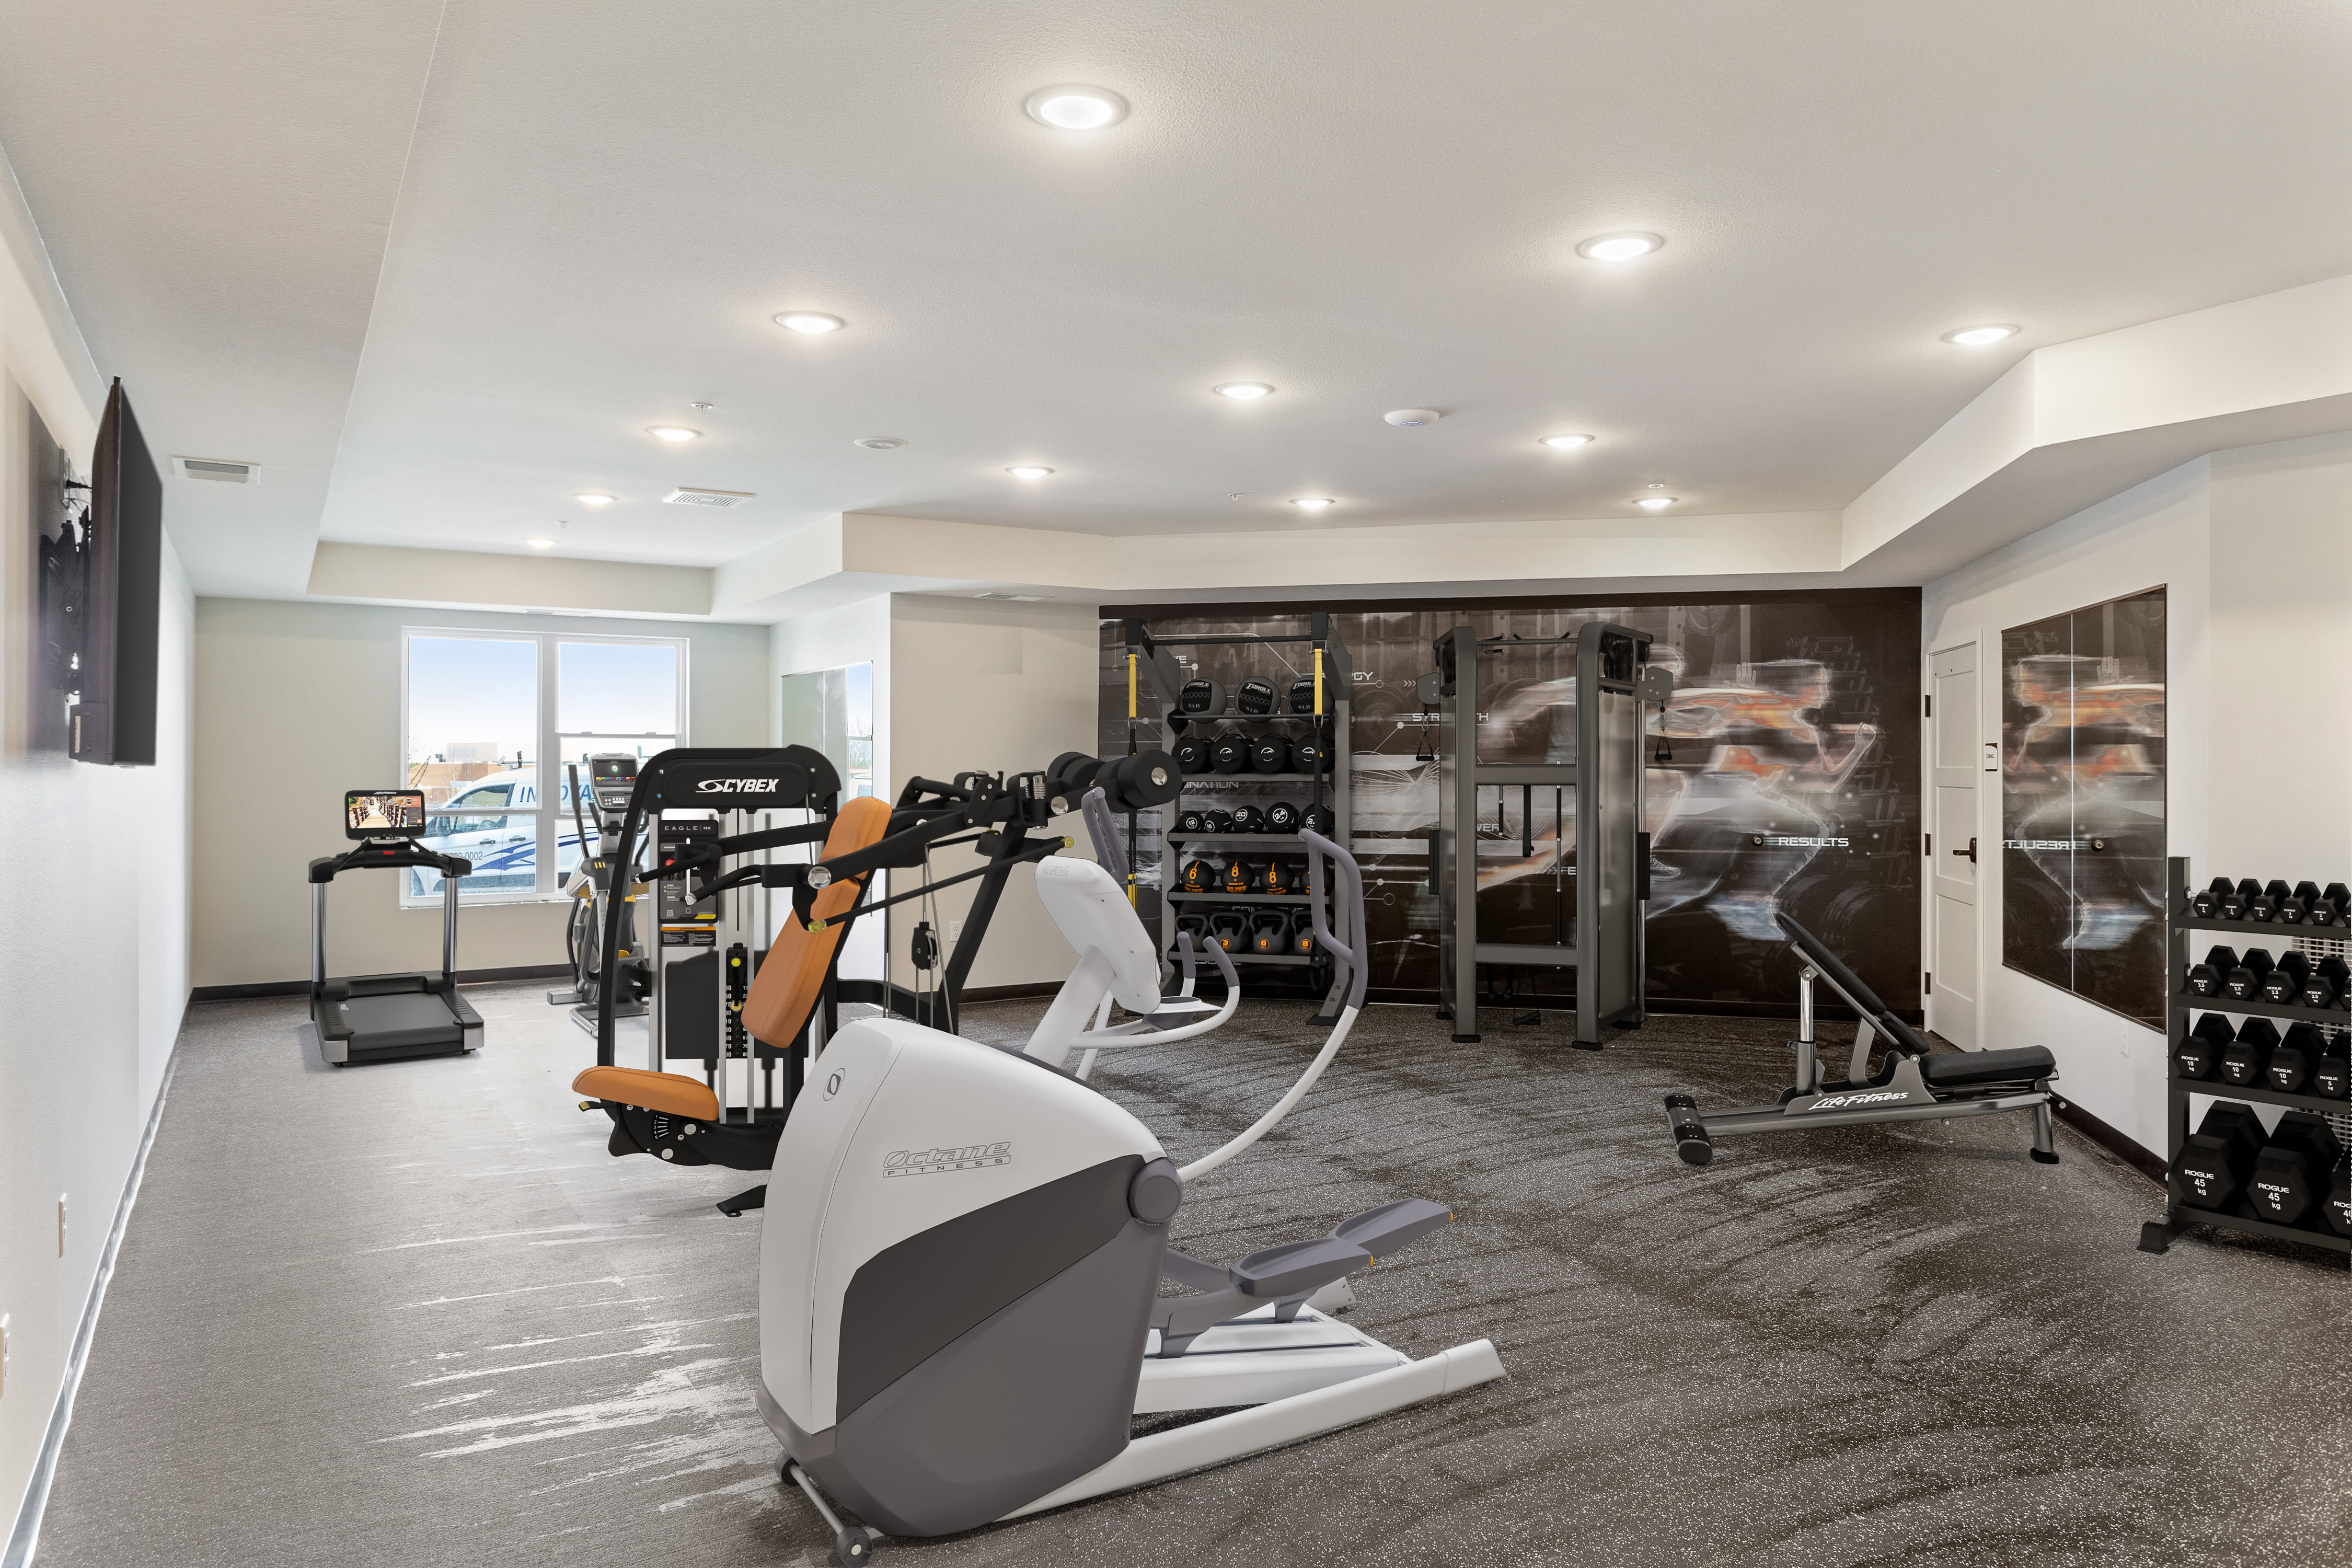 Arasan Apartments in Shakopee, Minnesota offers a resident gym